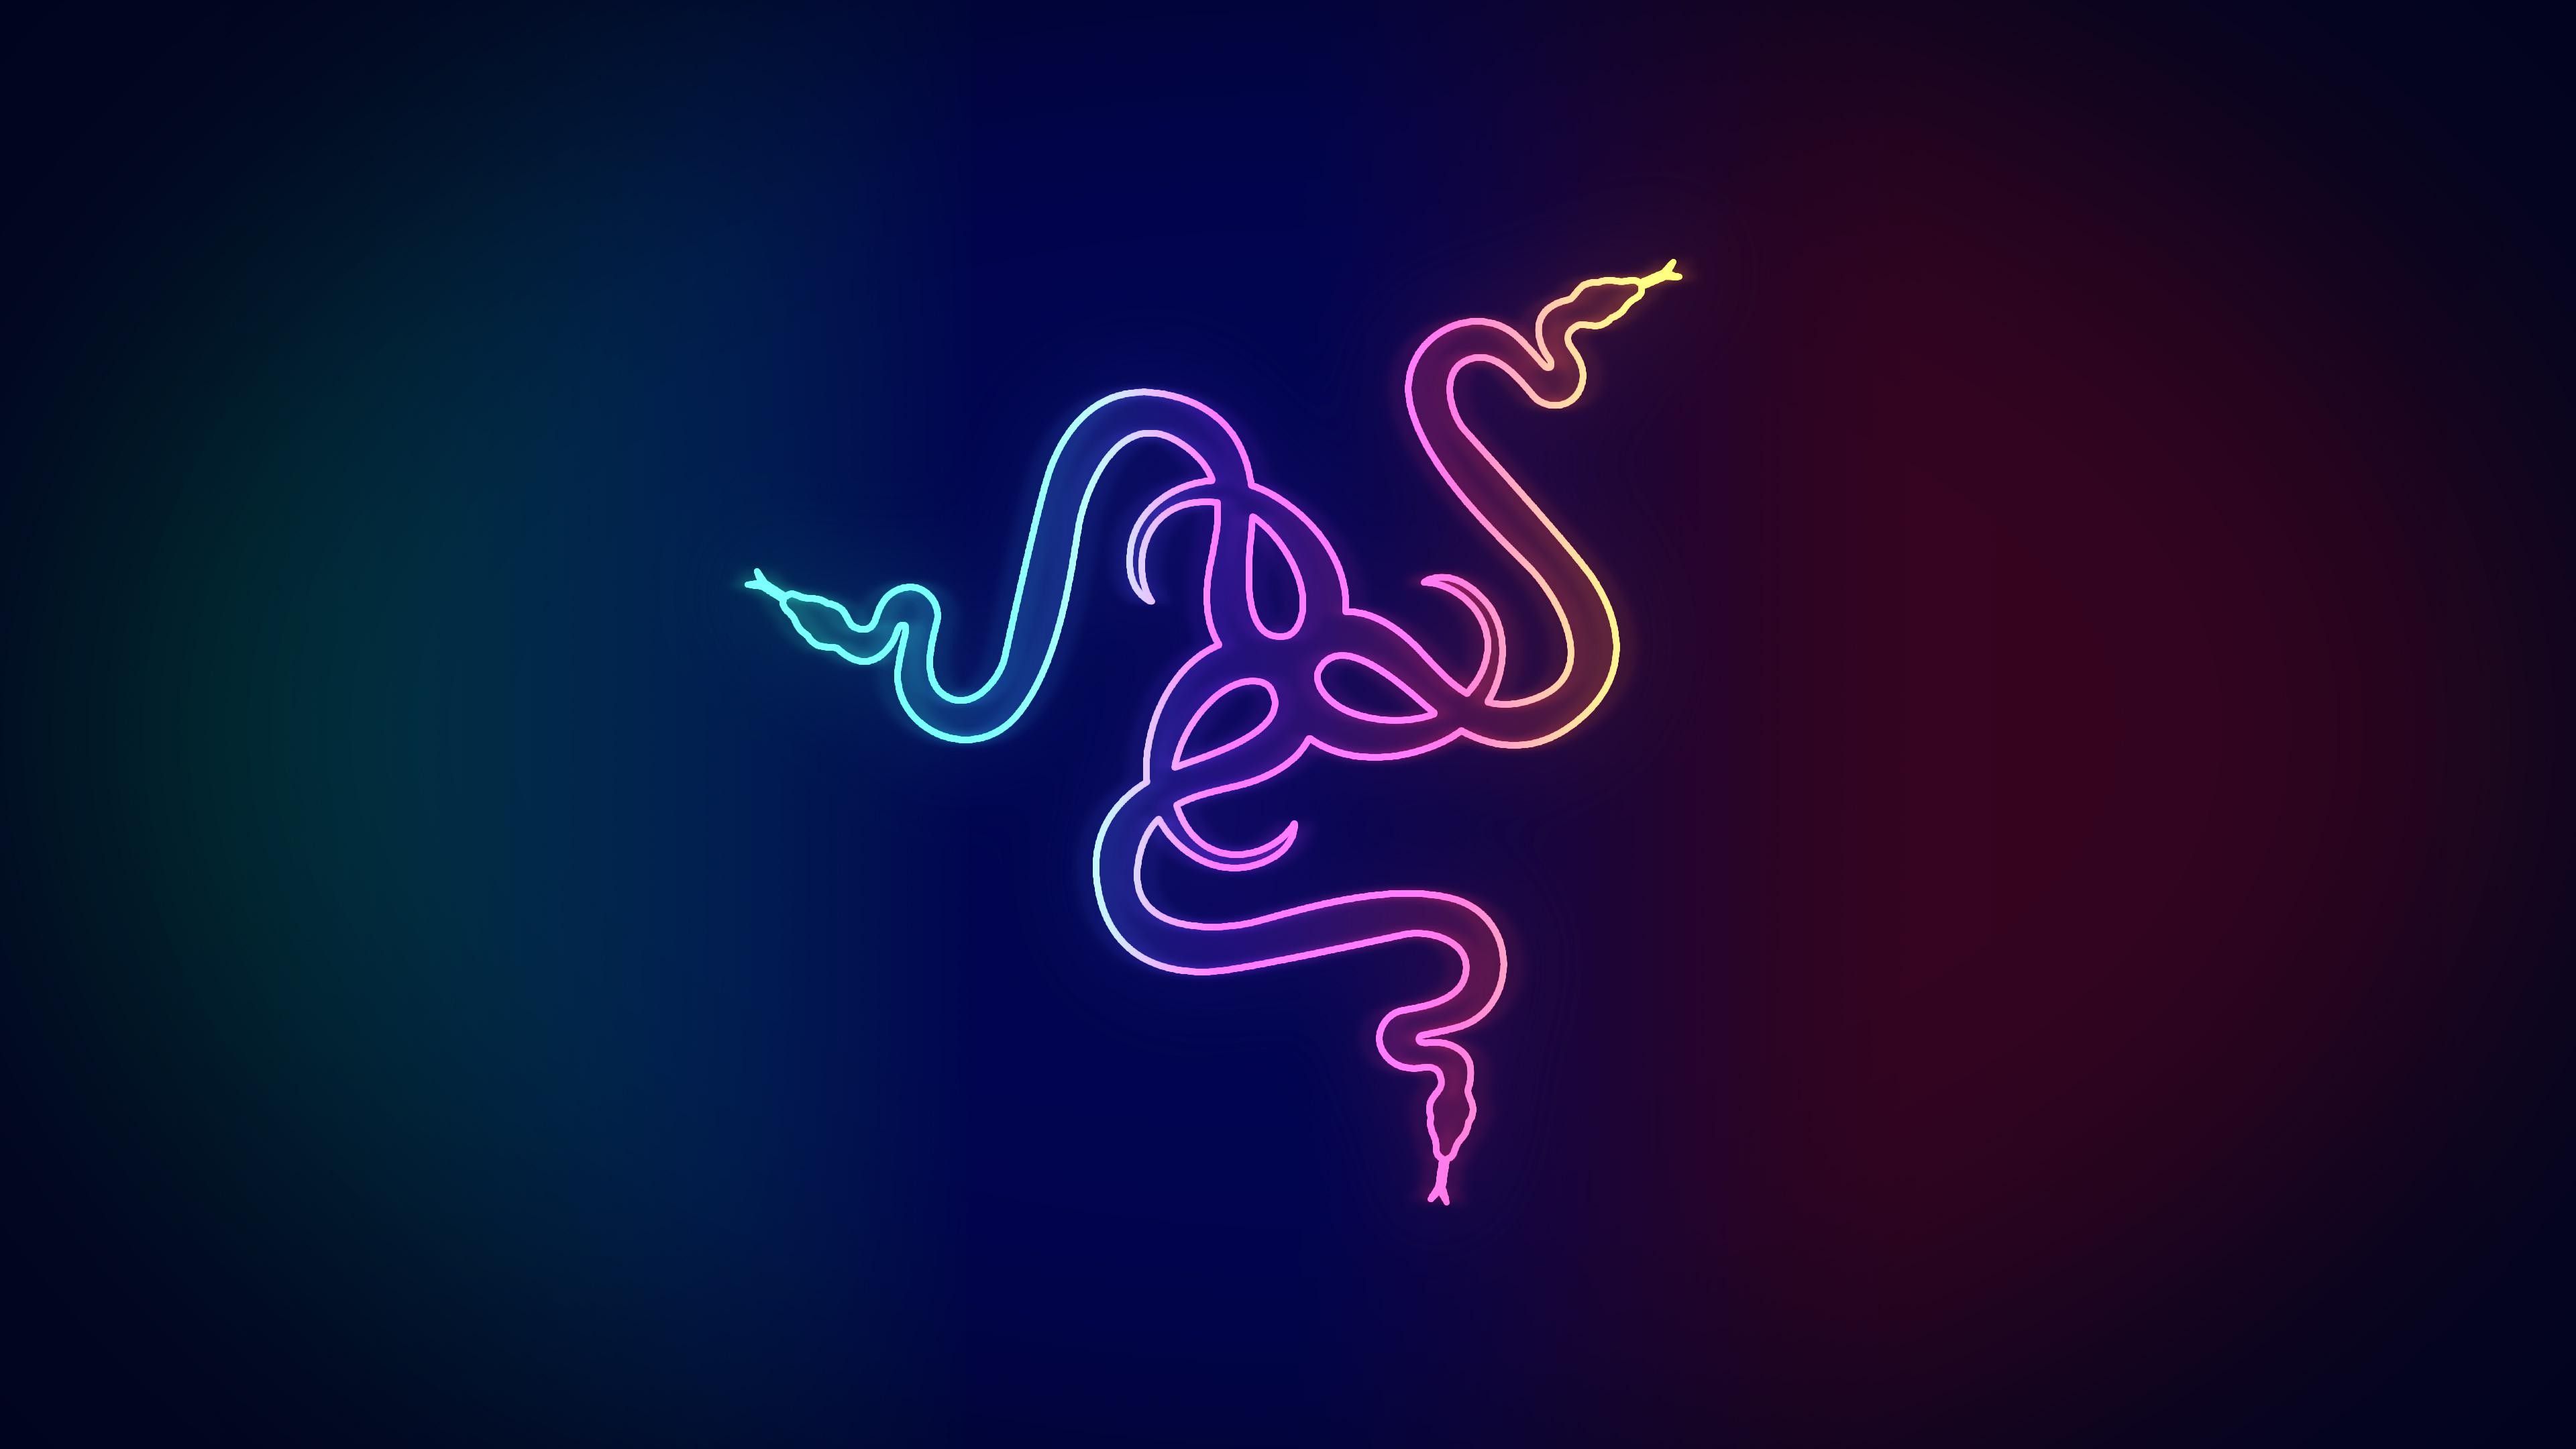 razer gif  4k wallpapers for pc, Purple wallpaper hd, Gaming wallpapers